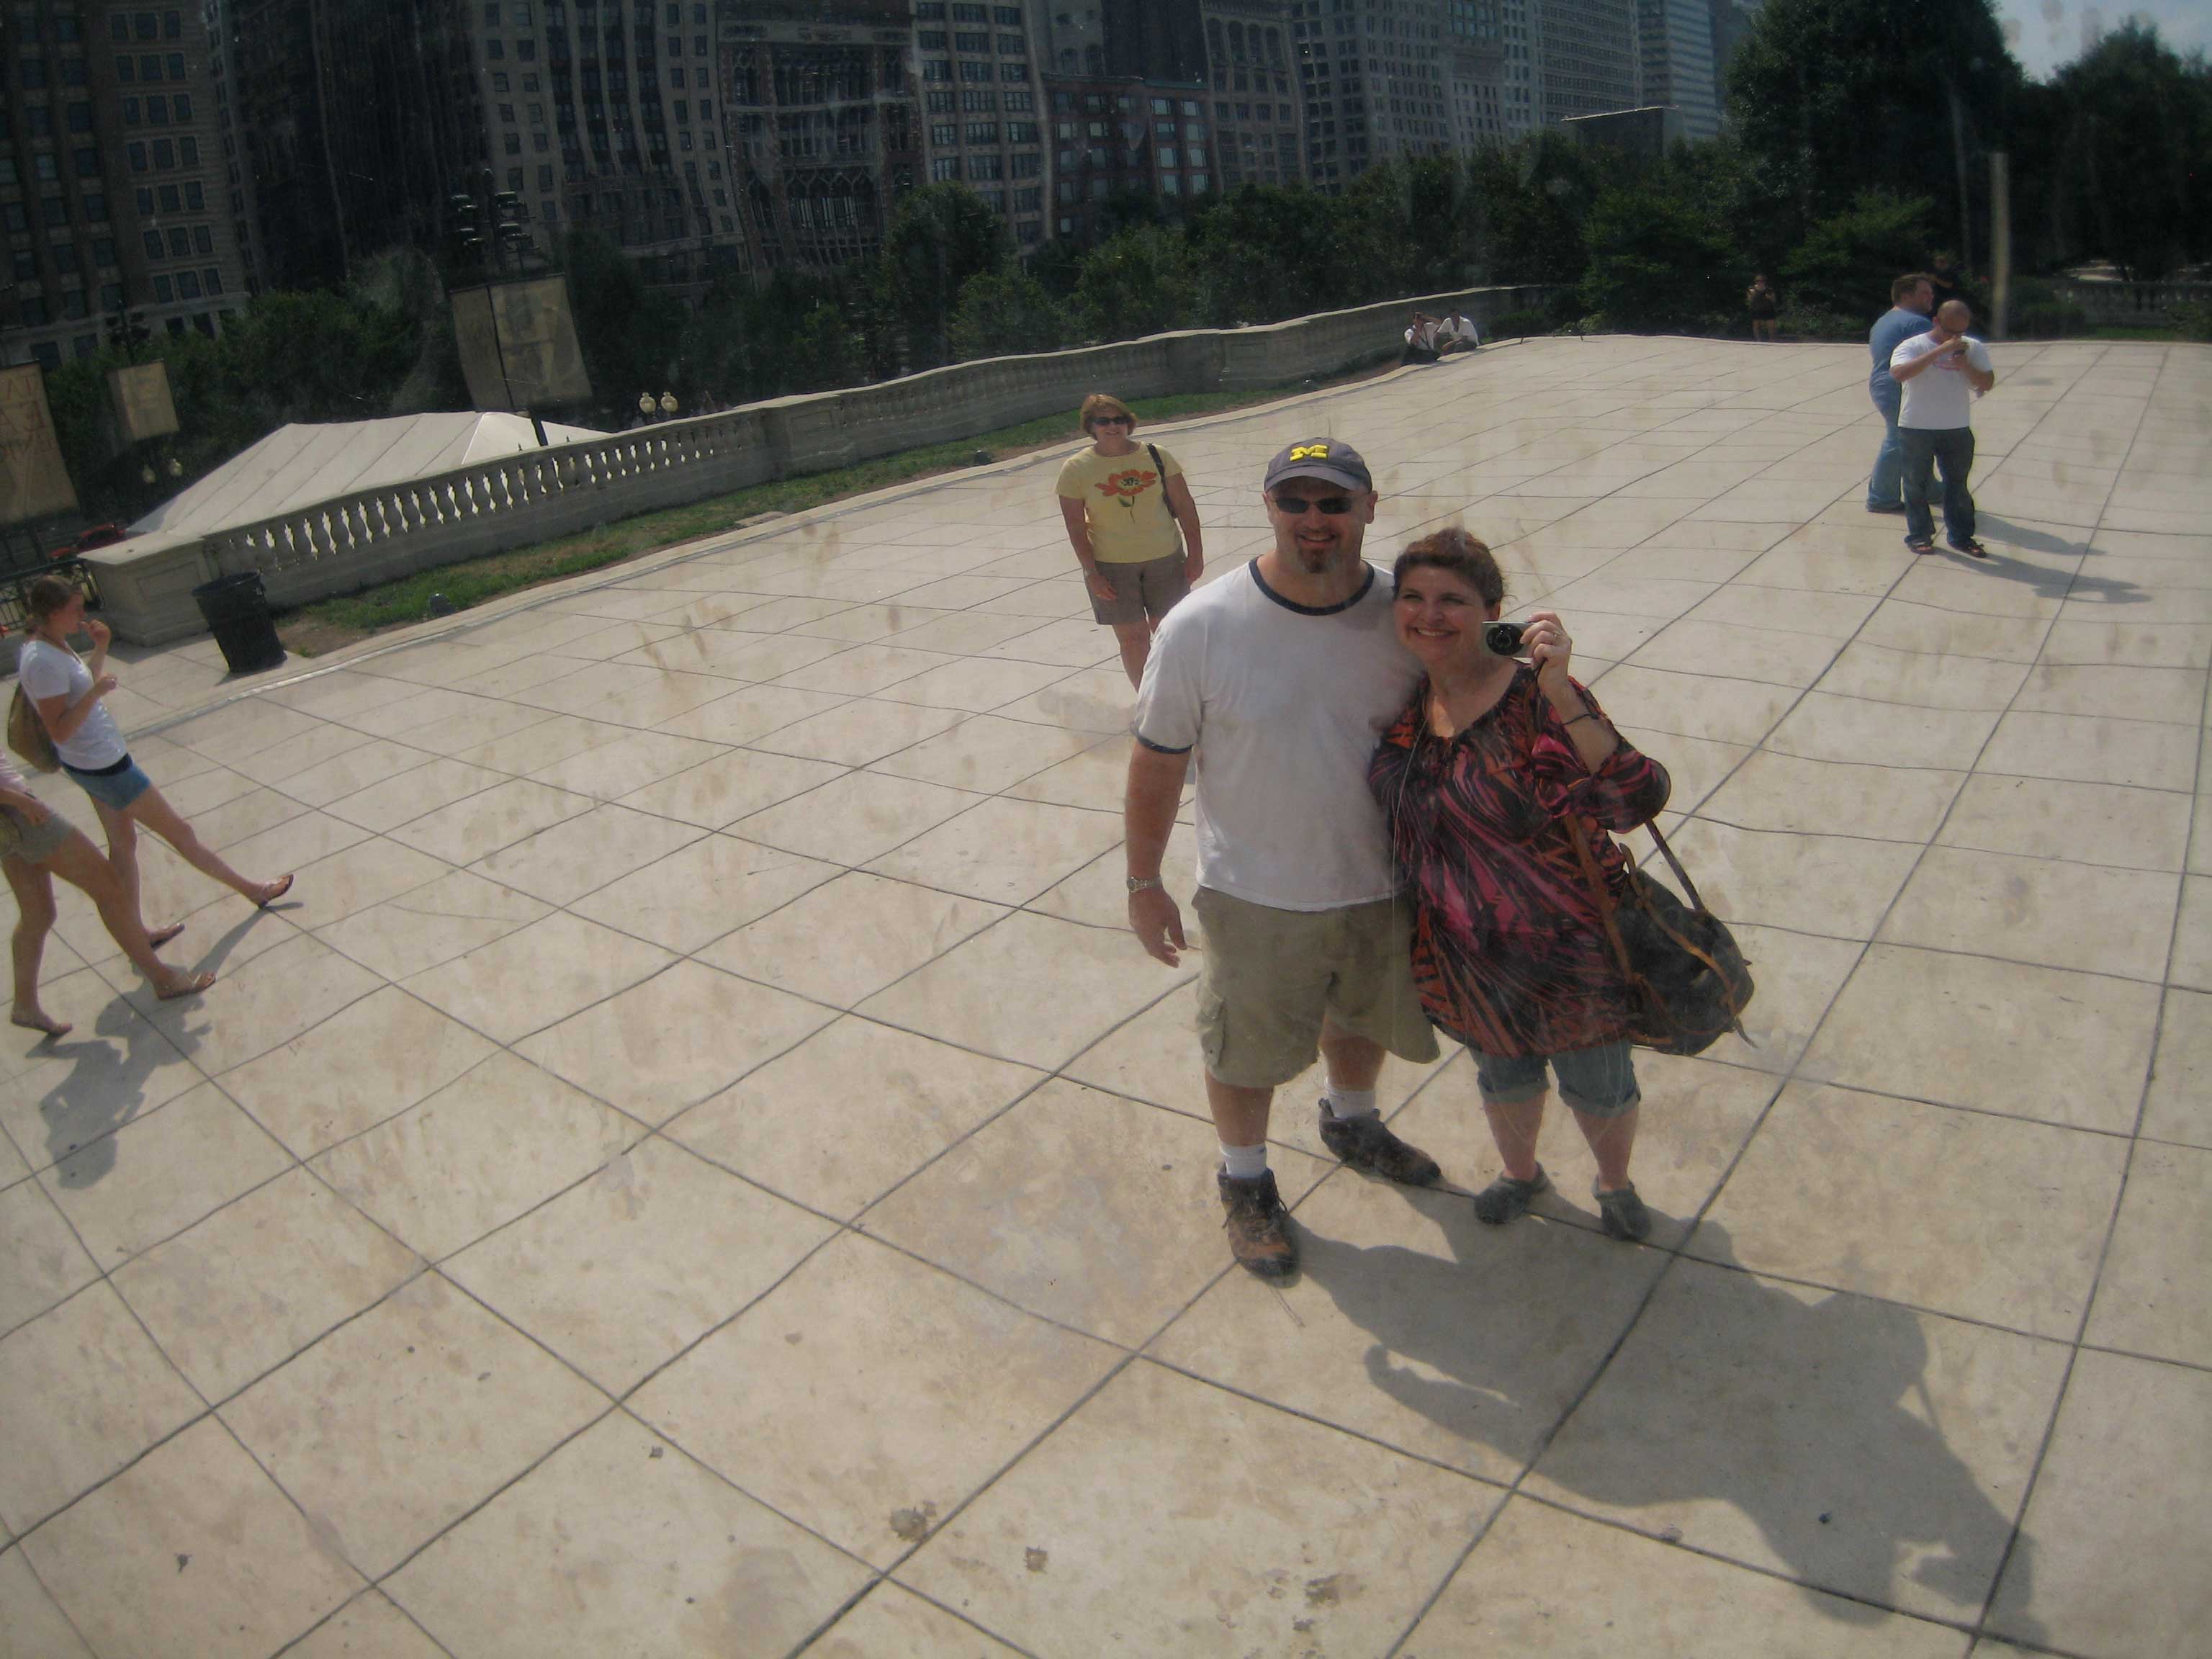 Doug and Ally at the Chicago "Bean"